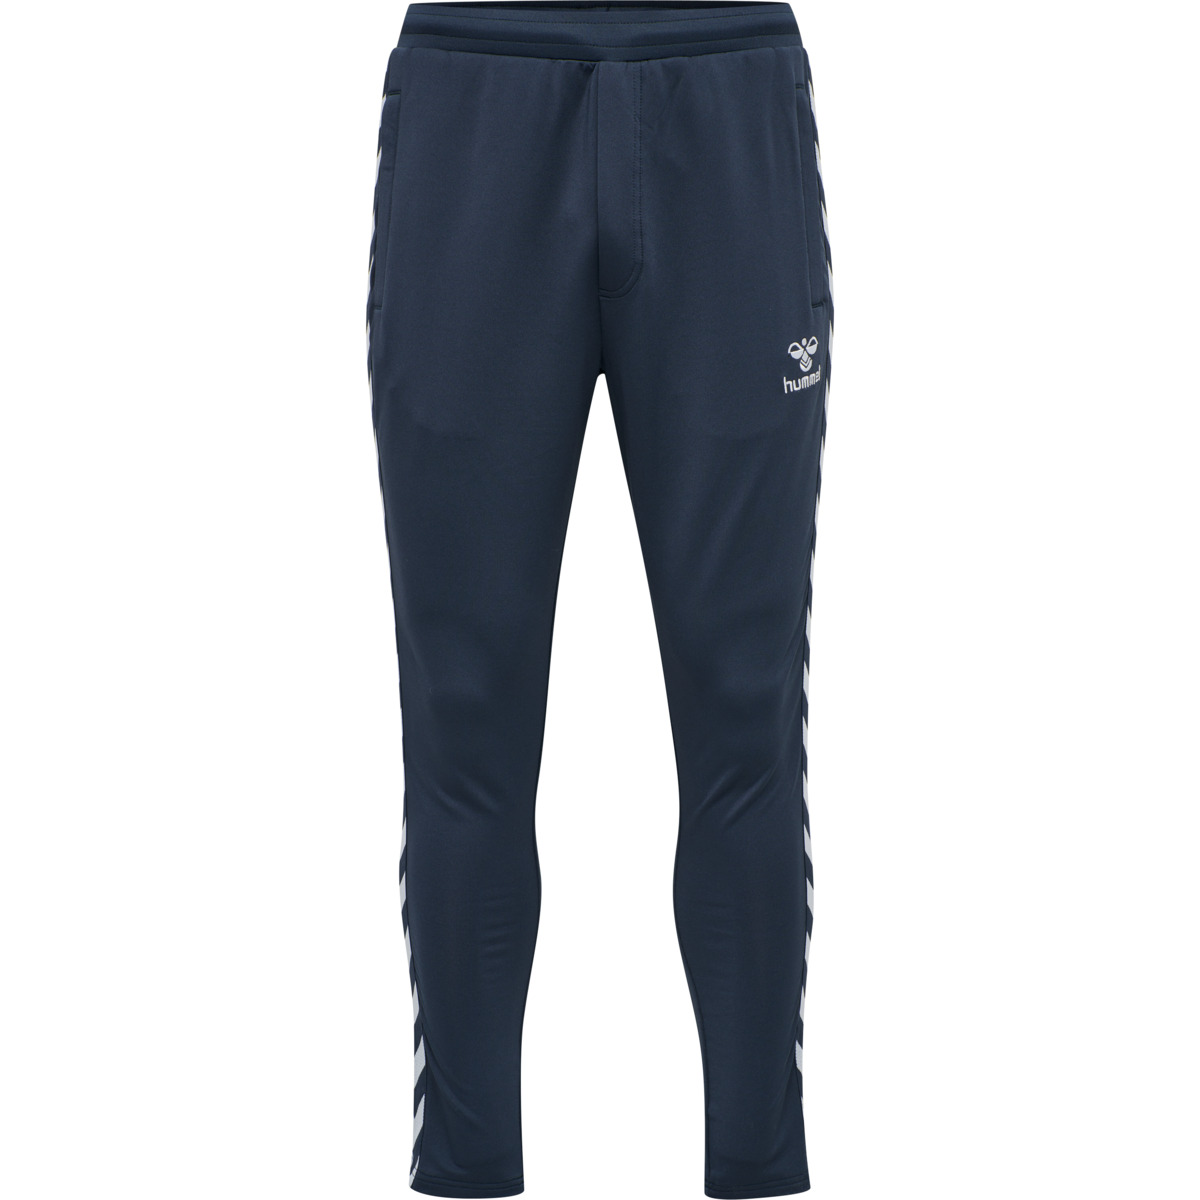 Men’s hmlNathan 2.0 Tapered Pants Blue Nights